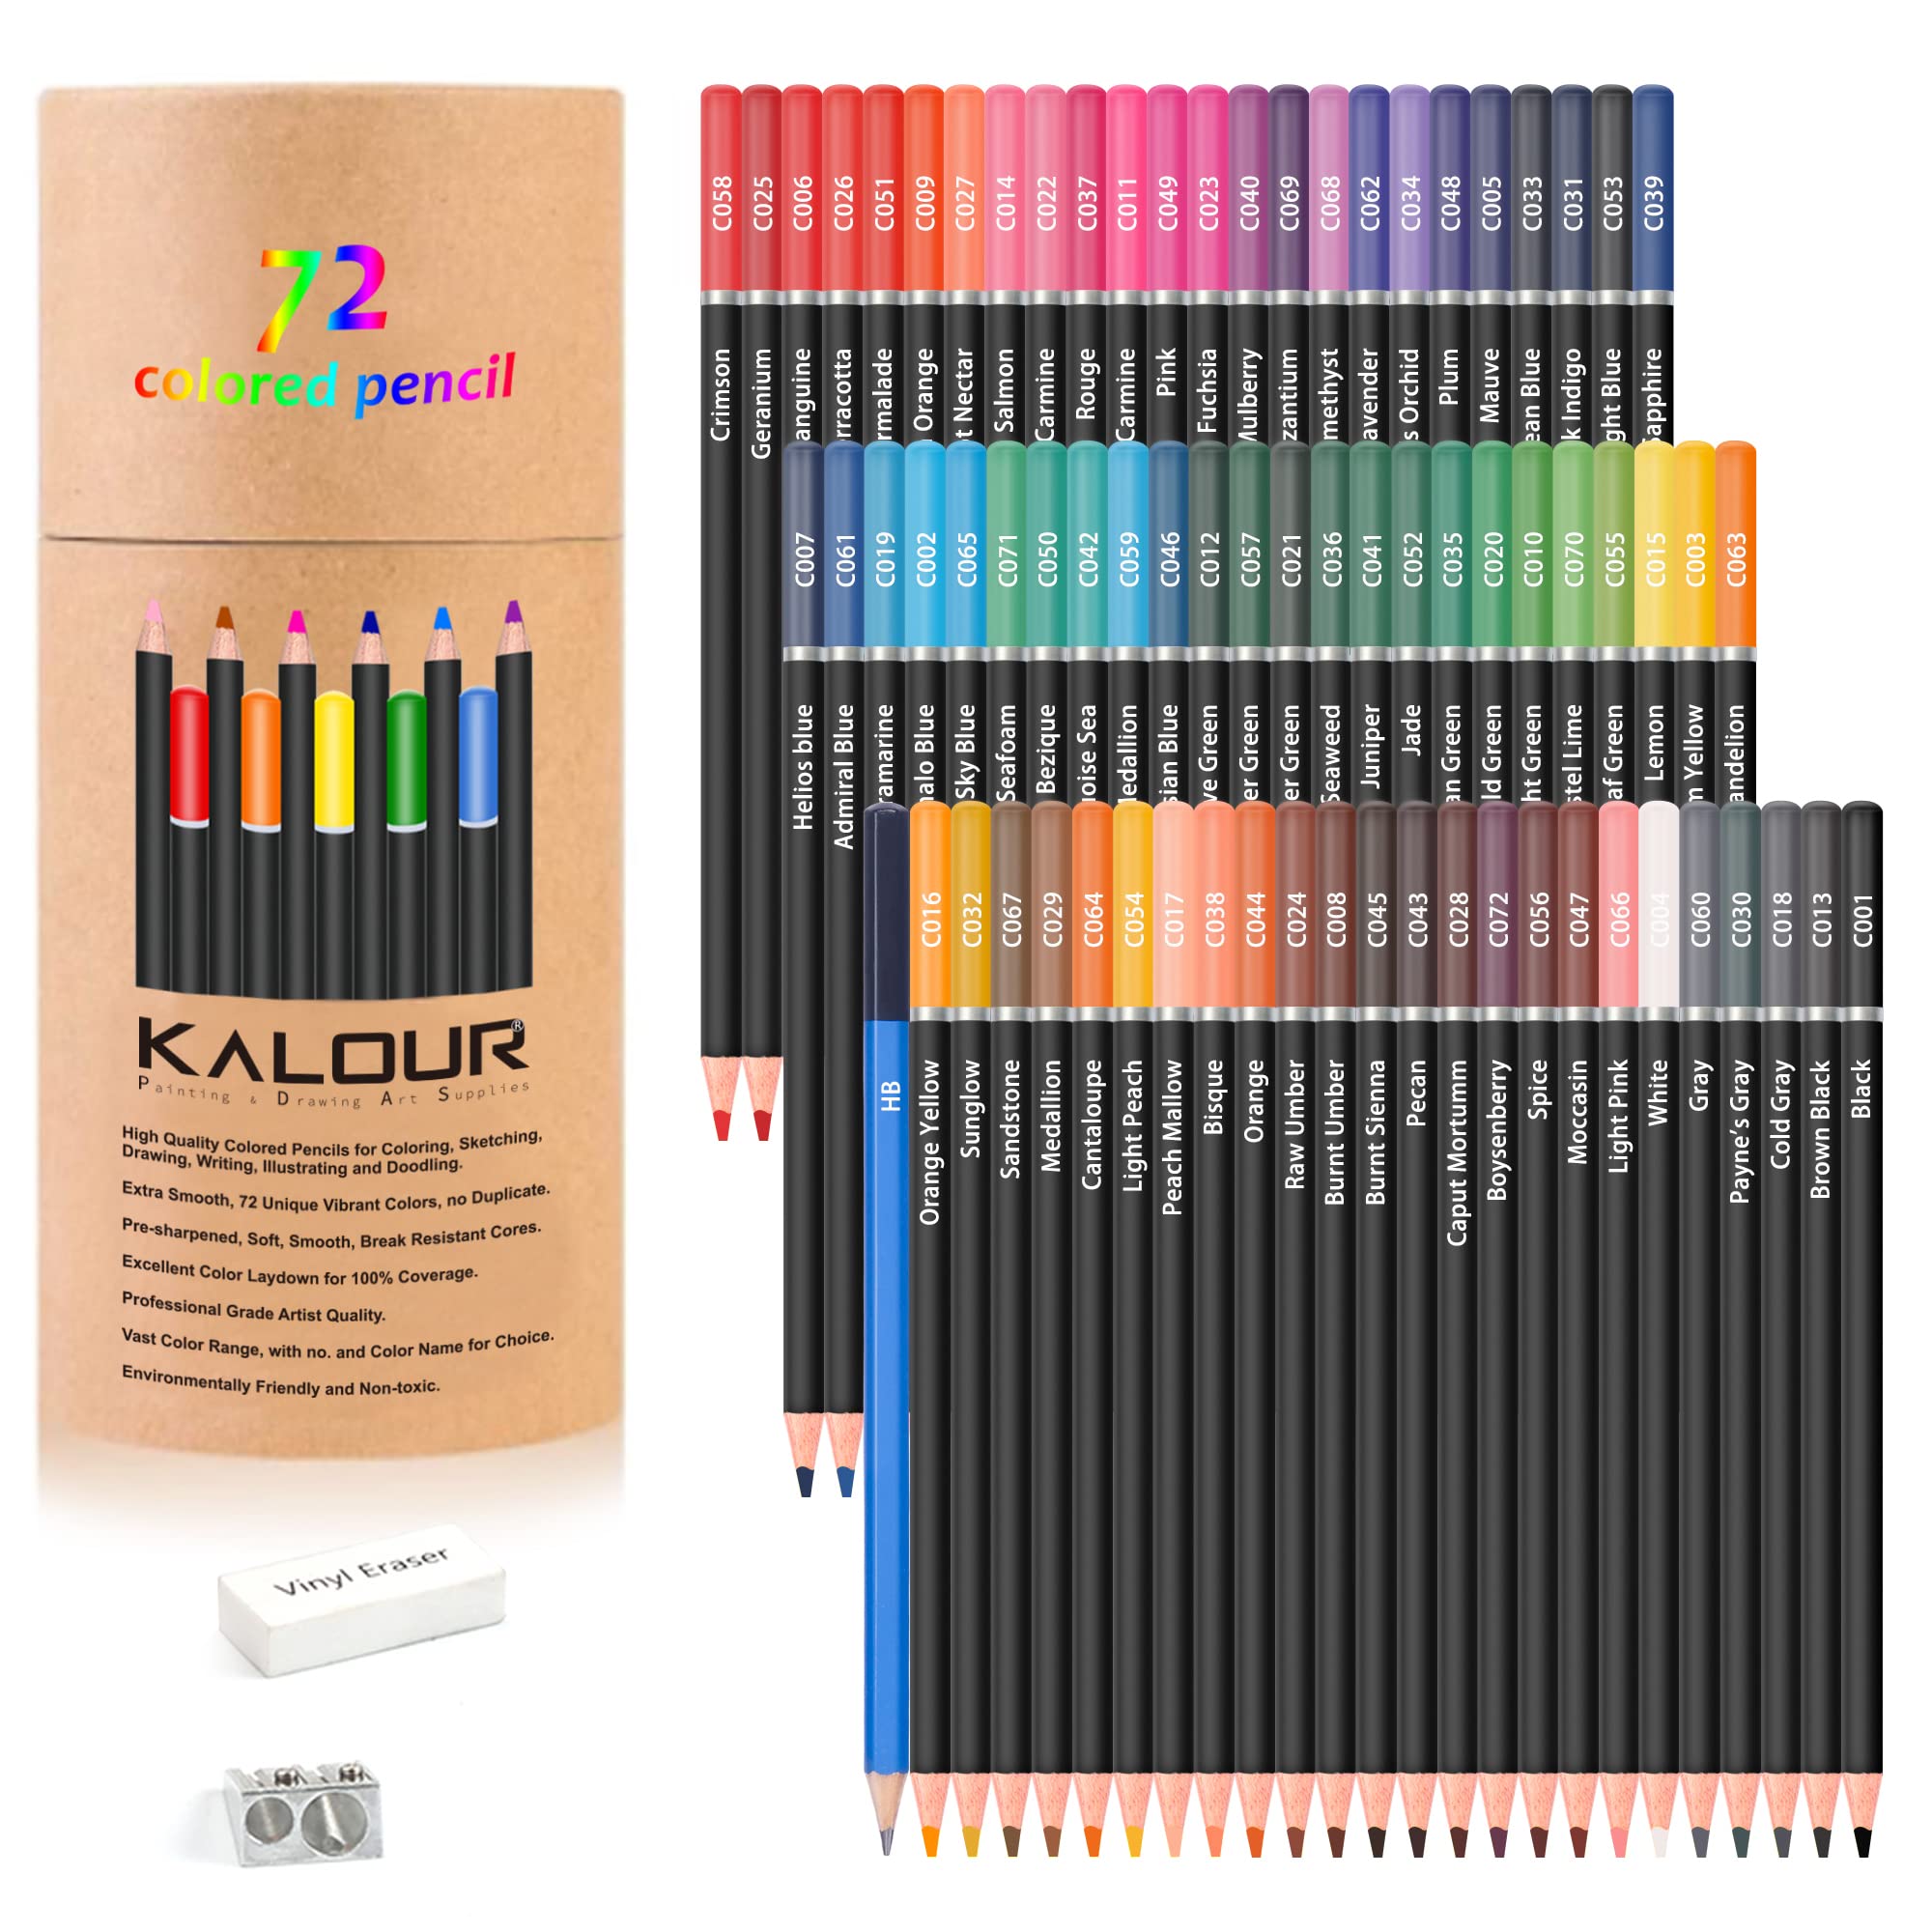 ThEast Colored Pencils for Adult Coloring Book Artist Colored Pencil Artist Quality Wooden Oil Based Colored Pencil (72 Colors)